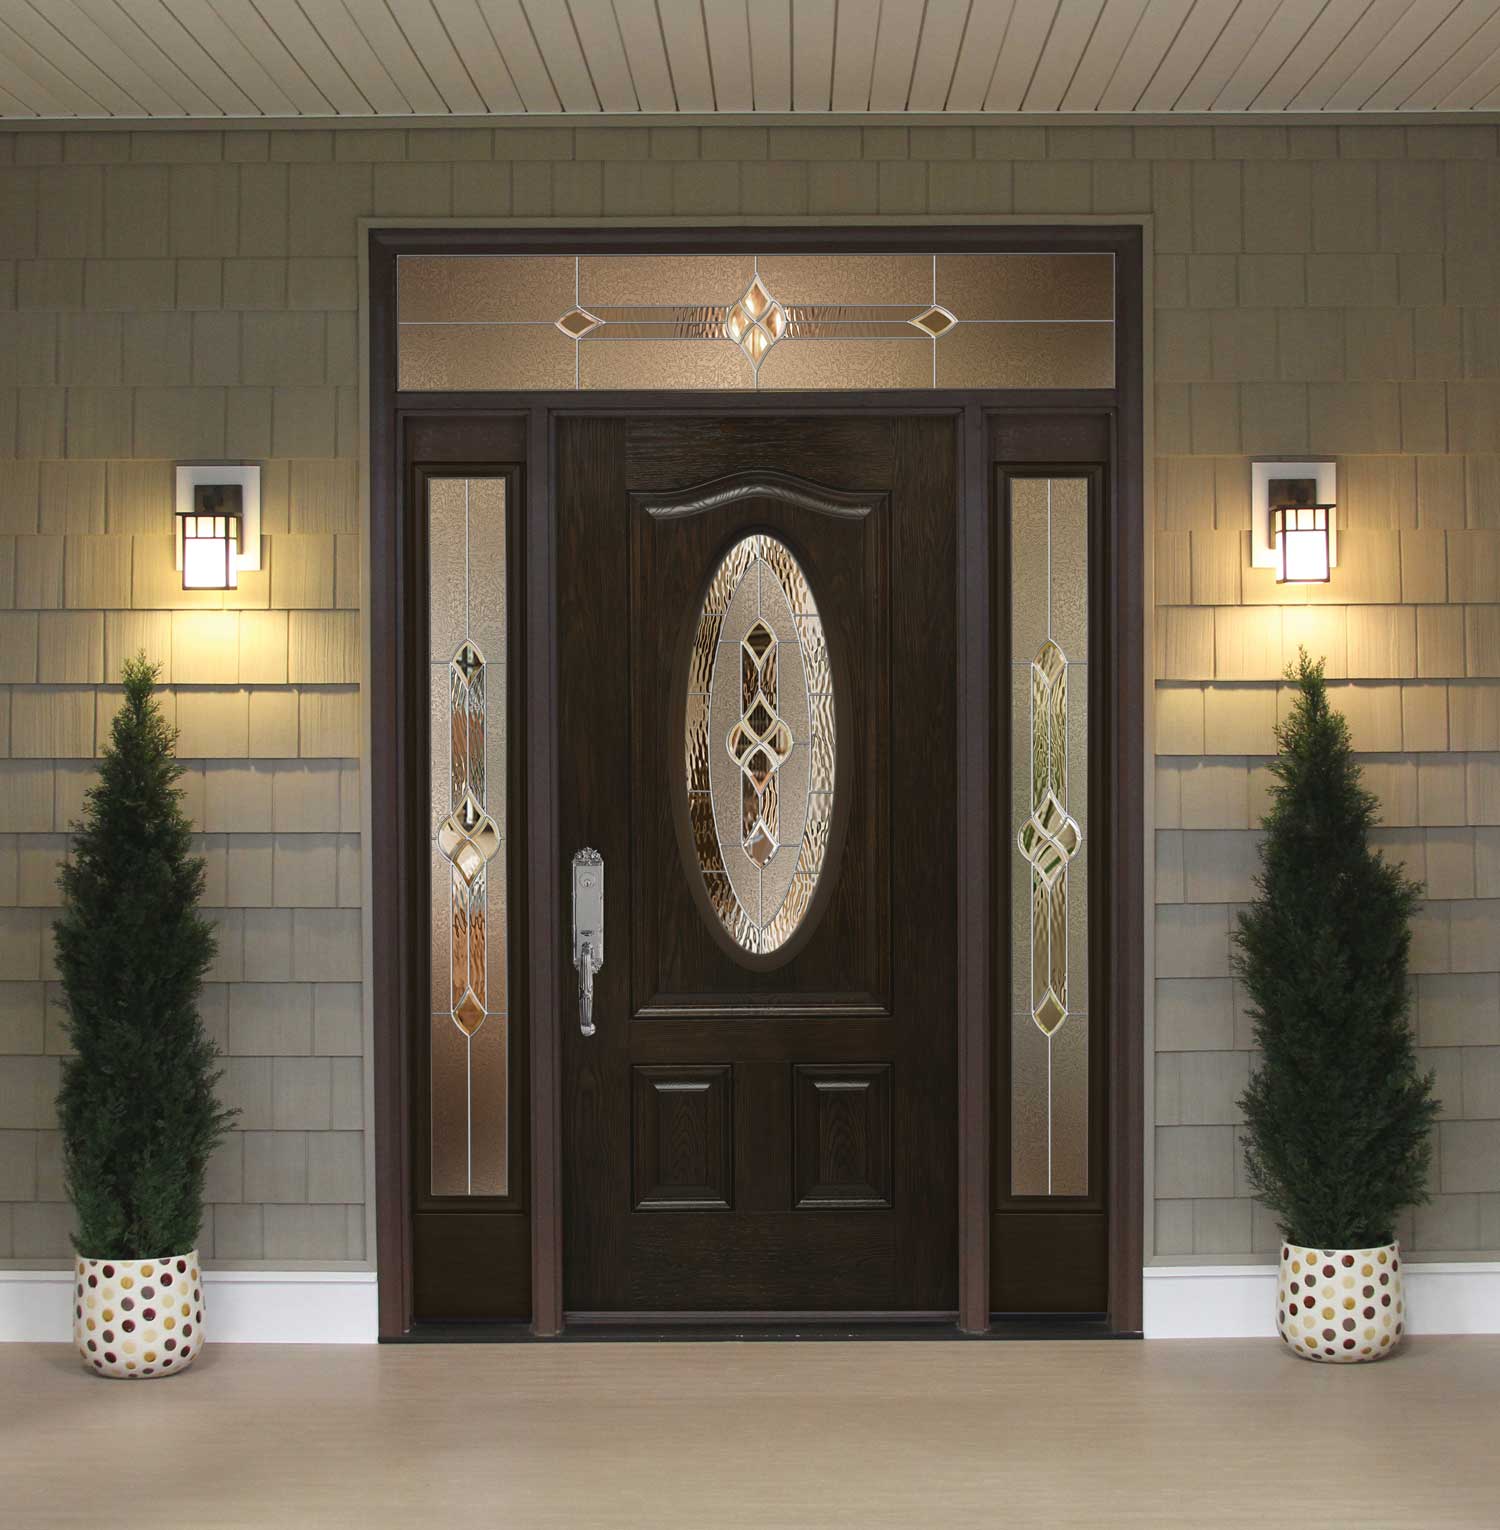 Black color front door with glass decoration